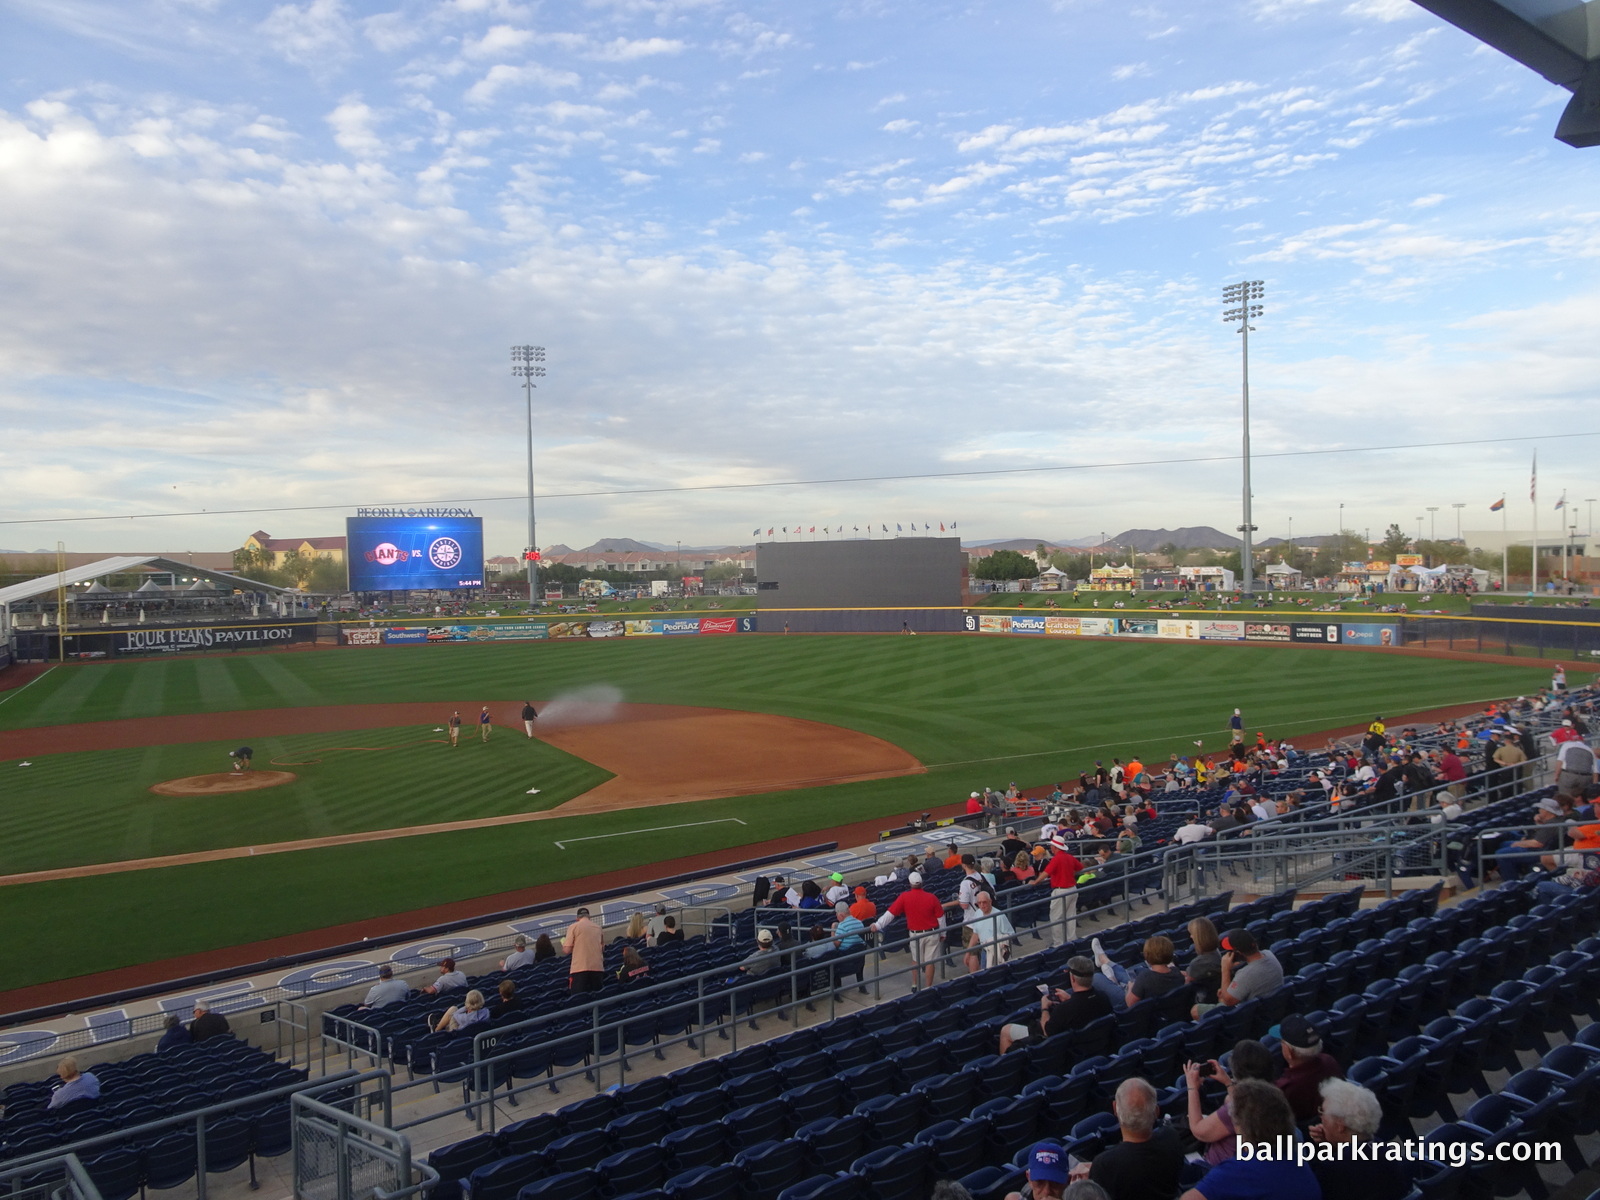 Peoria Sports Complex may not be anything special design-wise, but the fan experience is phenomenal.